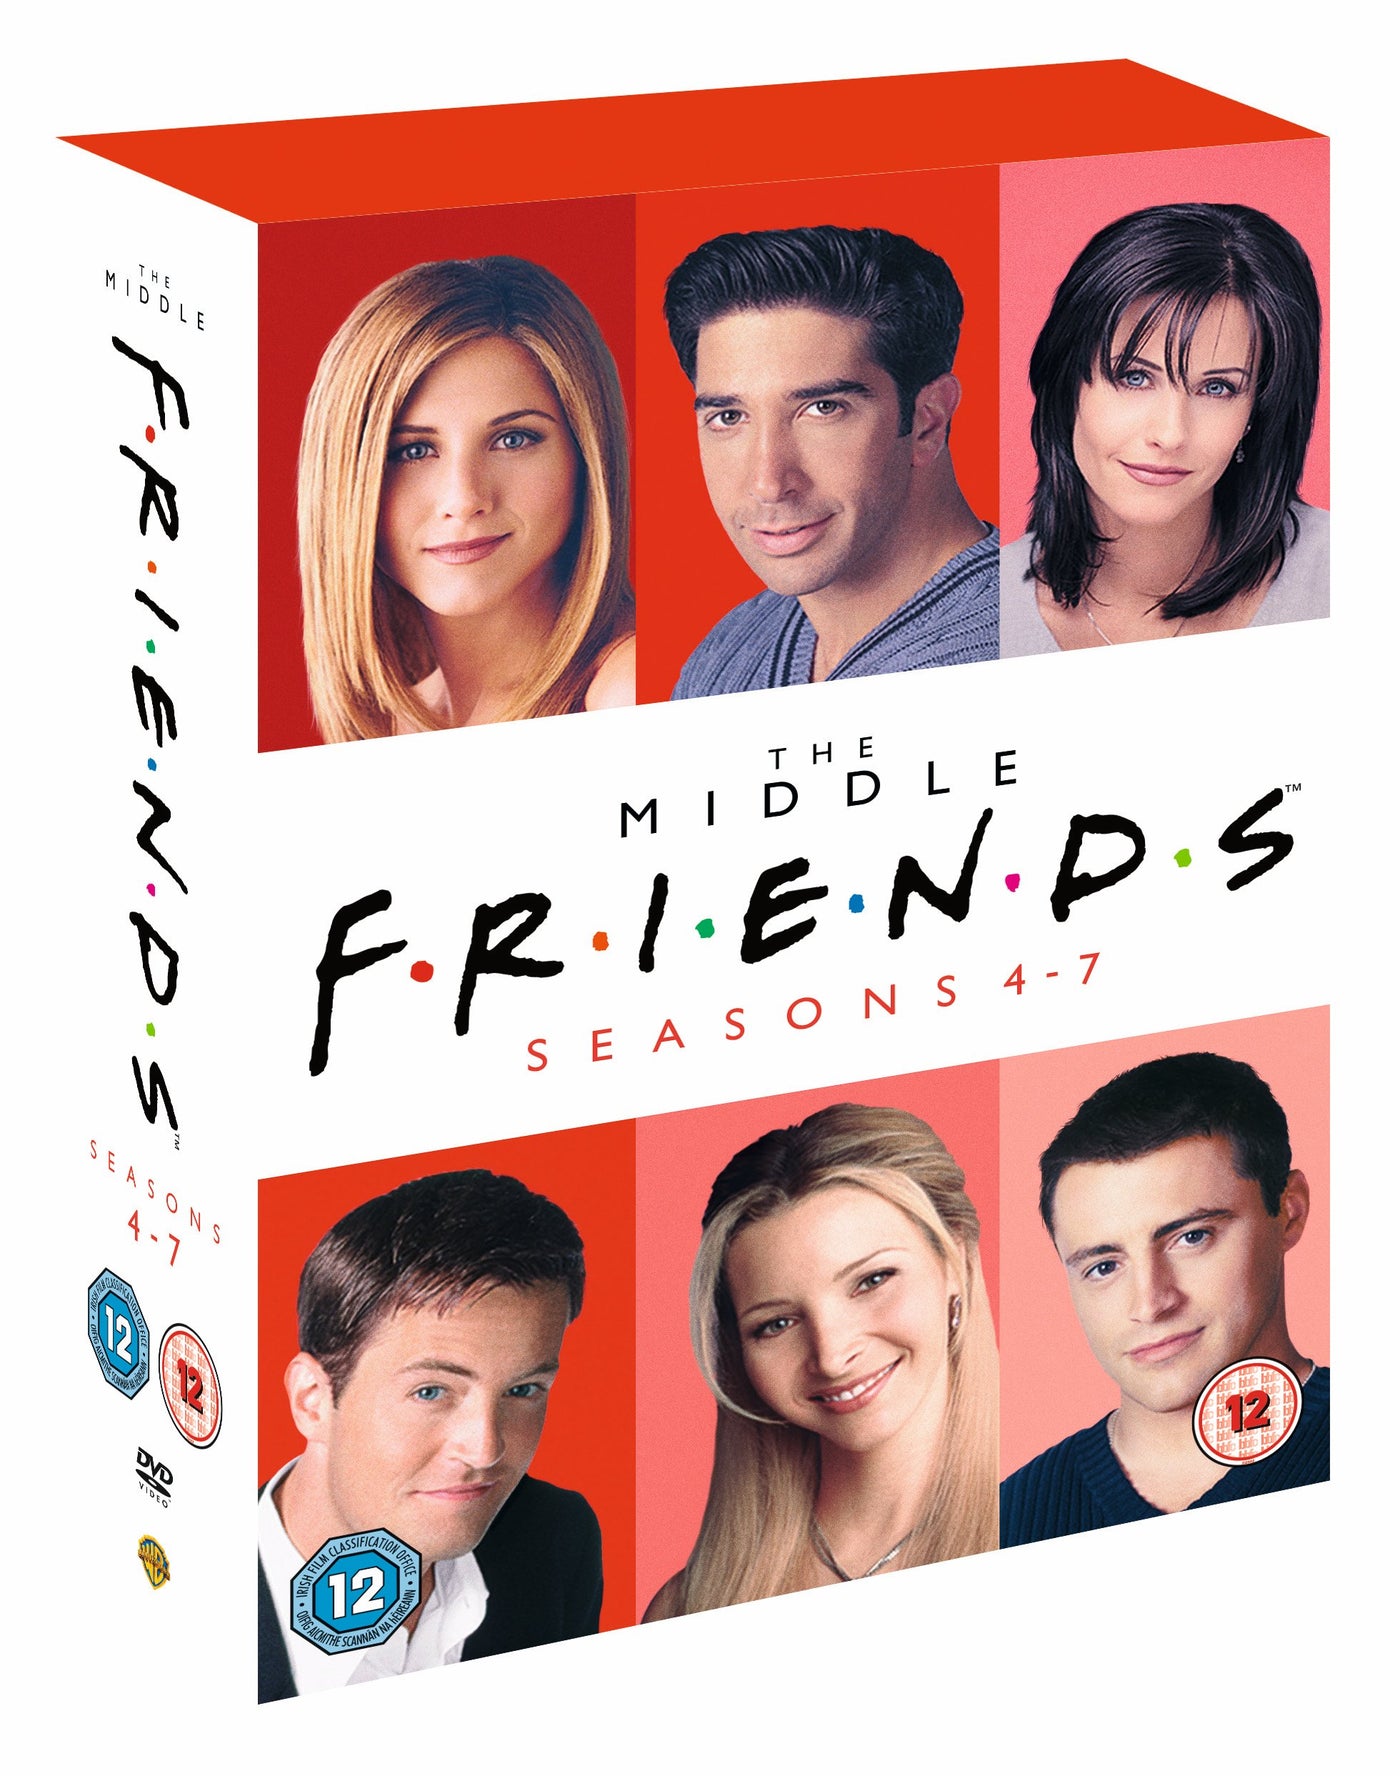 Friends: The Middle (Seasons 4-7) [1997] (DVD)